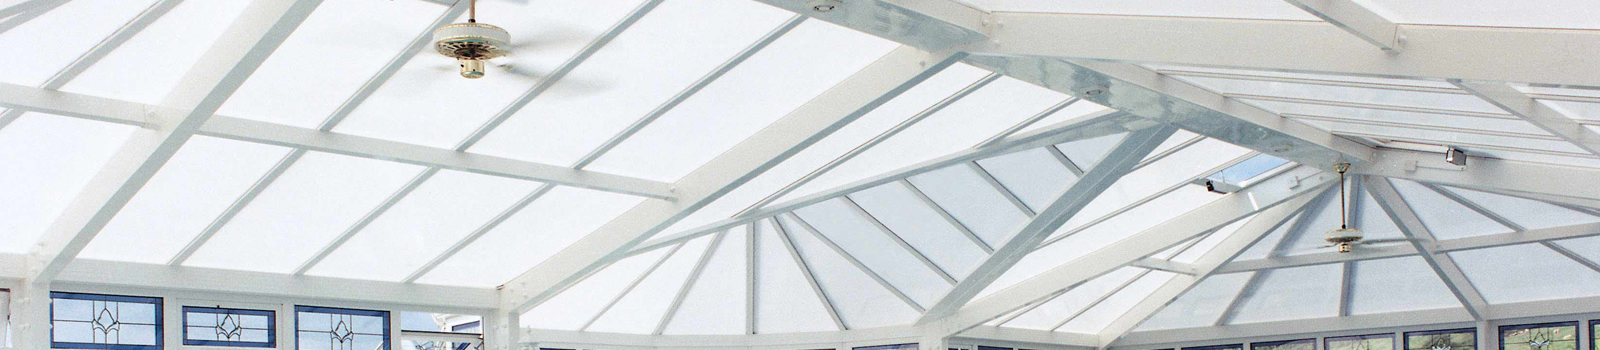 polycarbonate conservatory roofs